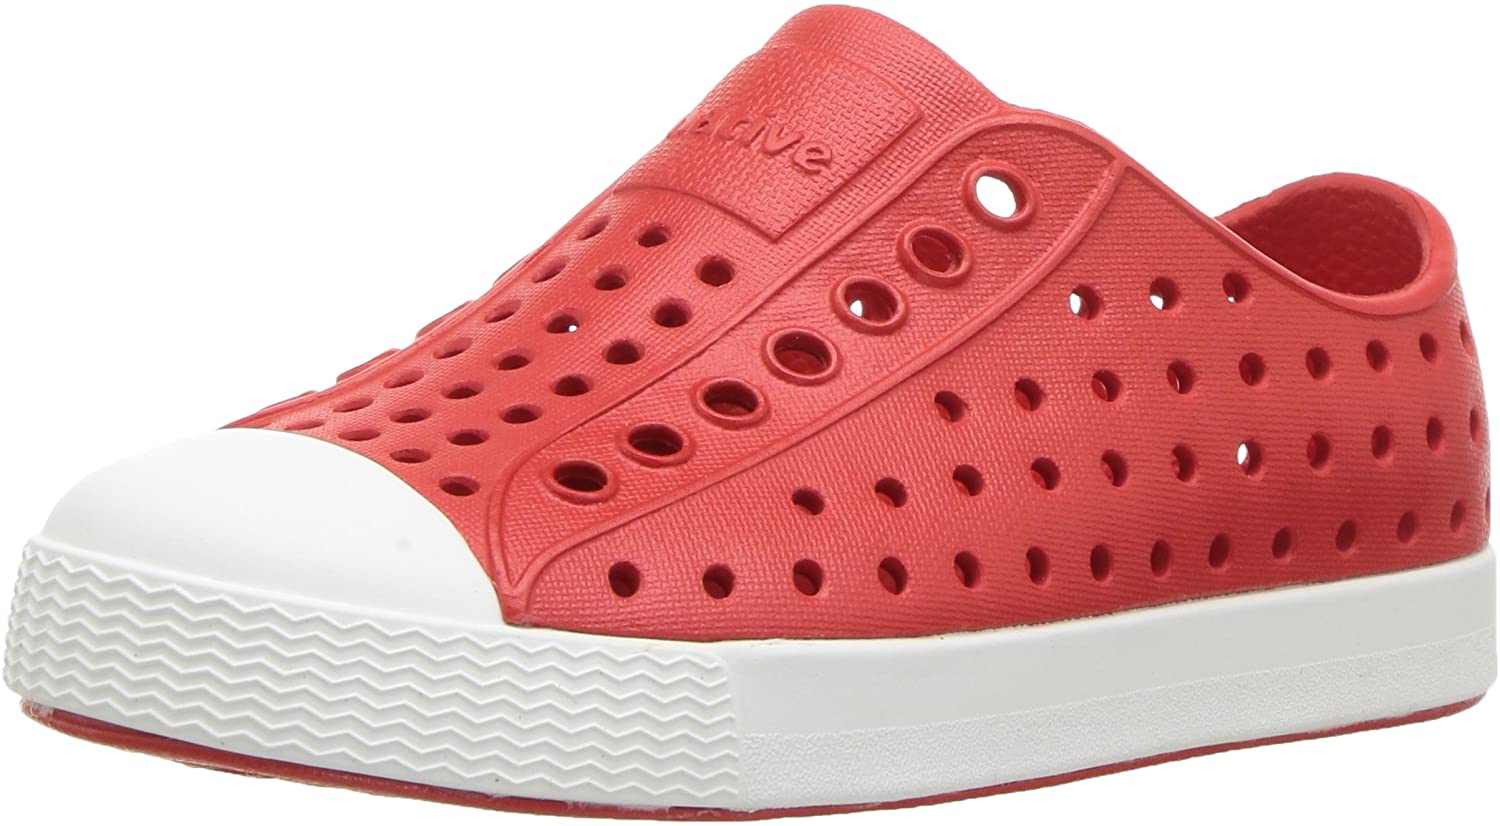 21 Durable Kids' Shoes You Can Buy Online